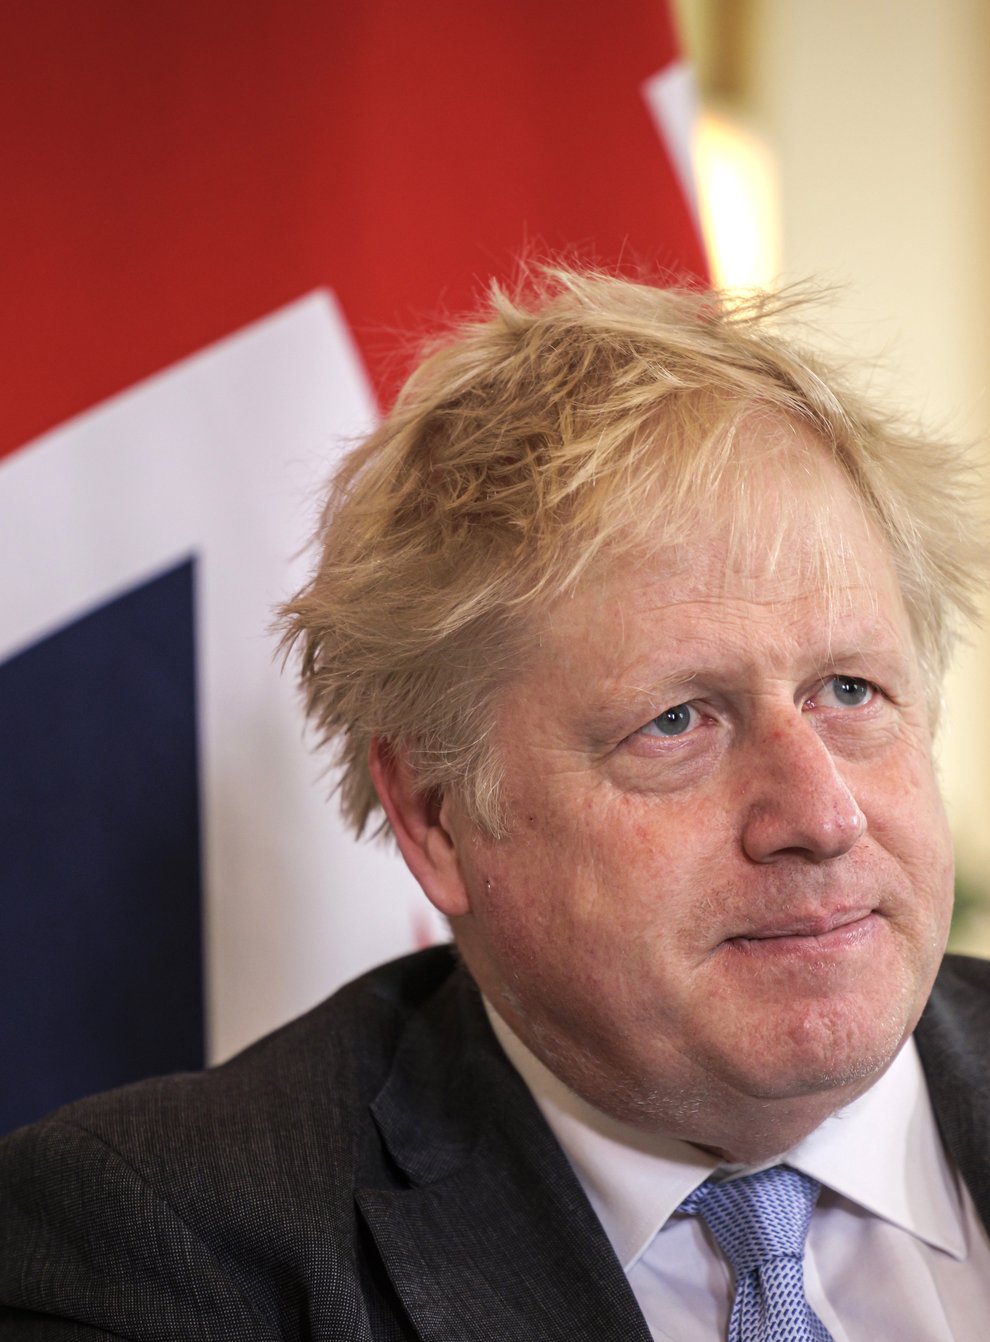 Prime Minister Boris Johnson will be interviewed live on Good Morning Britain on April 3 (Rob Pinney/PA